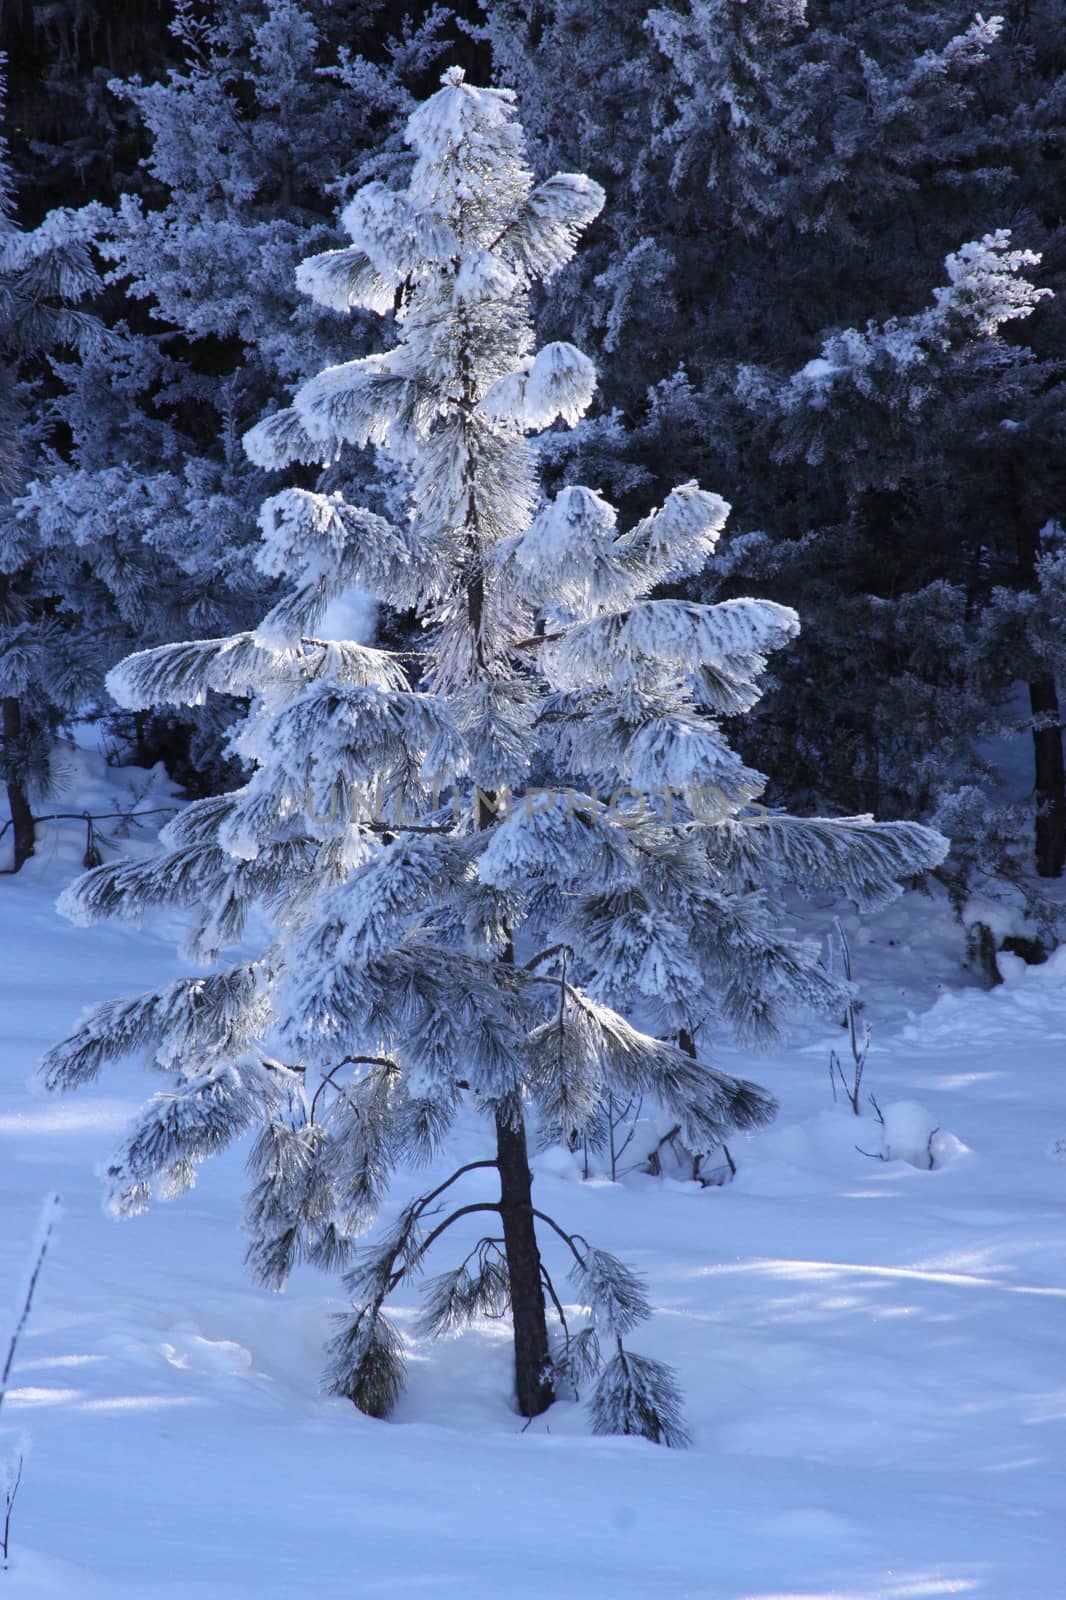 Snow and Hoar Frost on a tree in Winter.